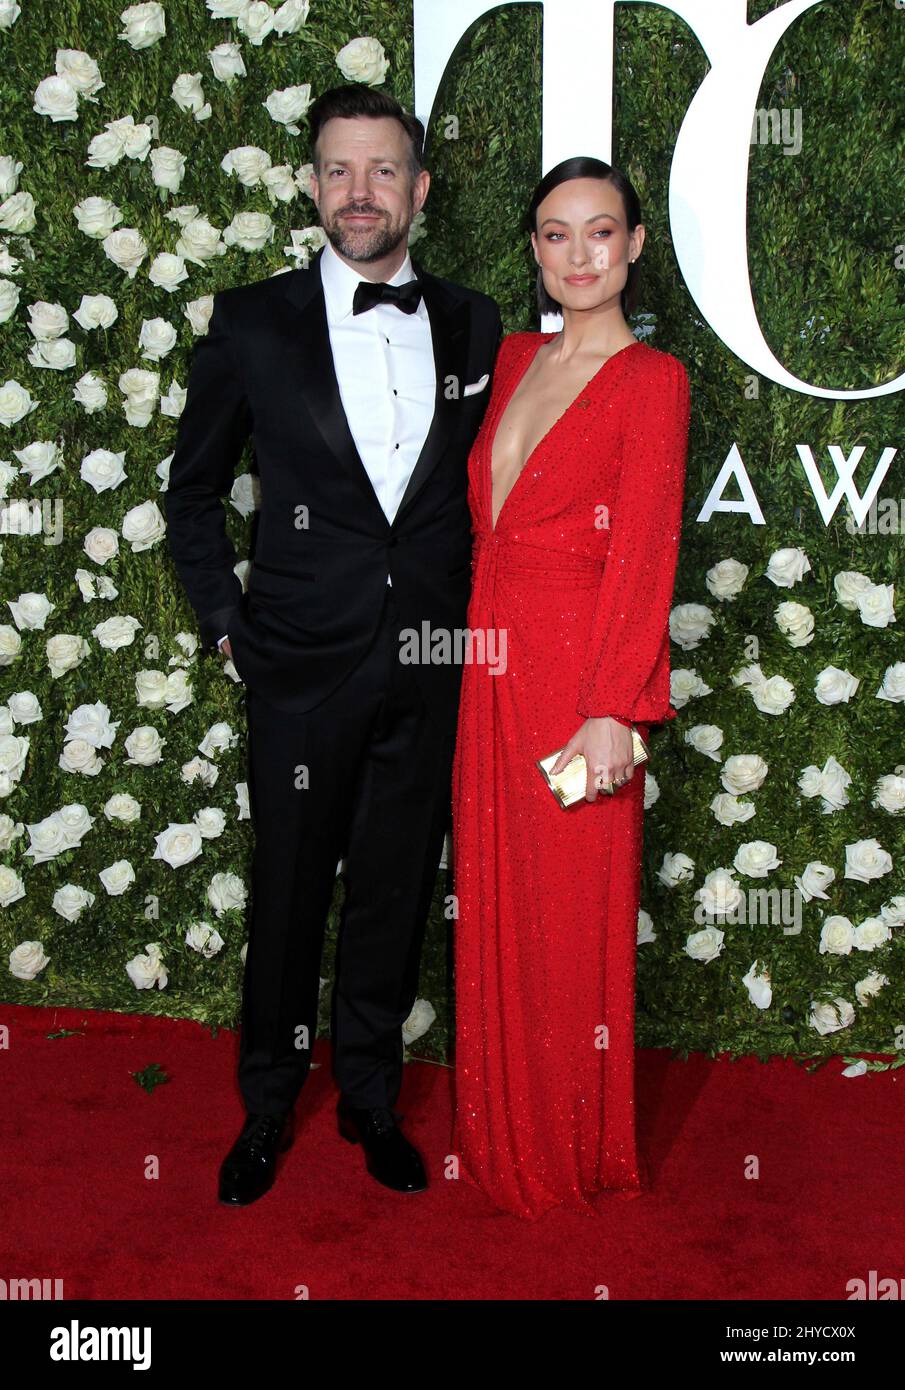 Jason Sudeikis And Olivia Wilde Attending The 71st Annual Tony Awards In